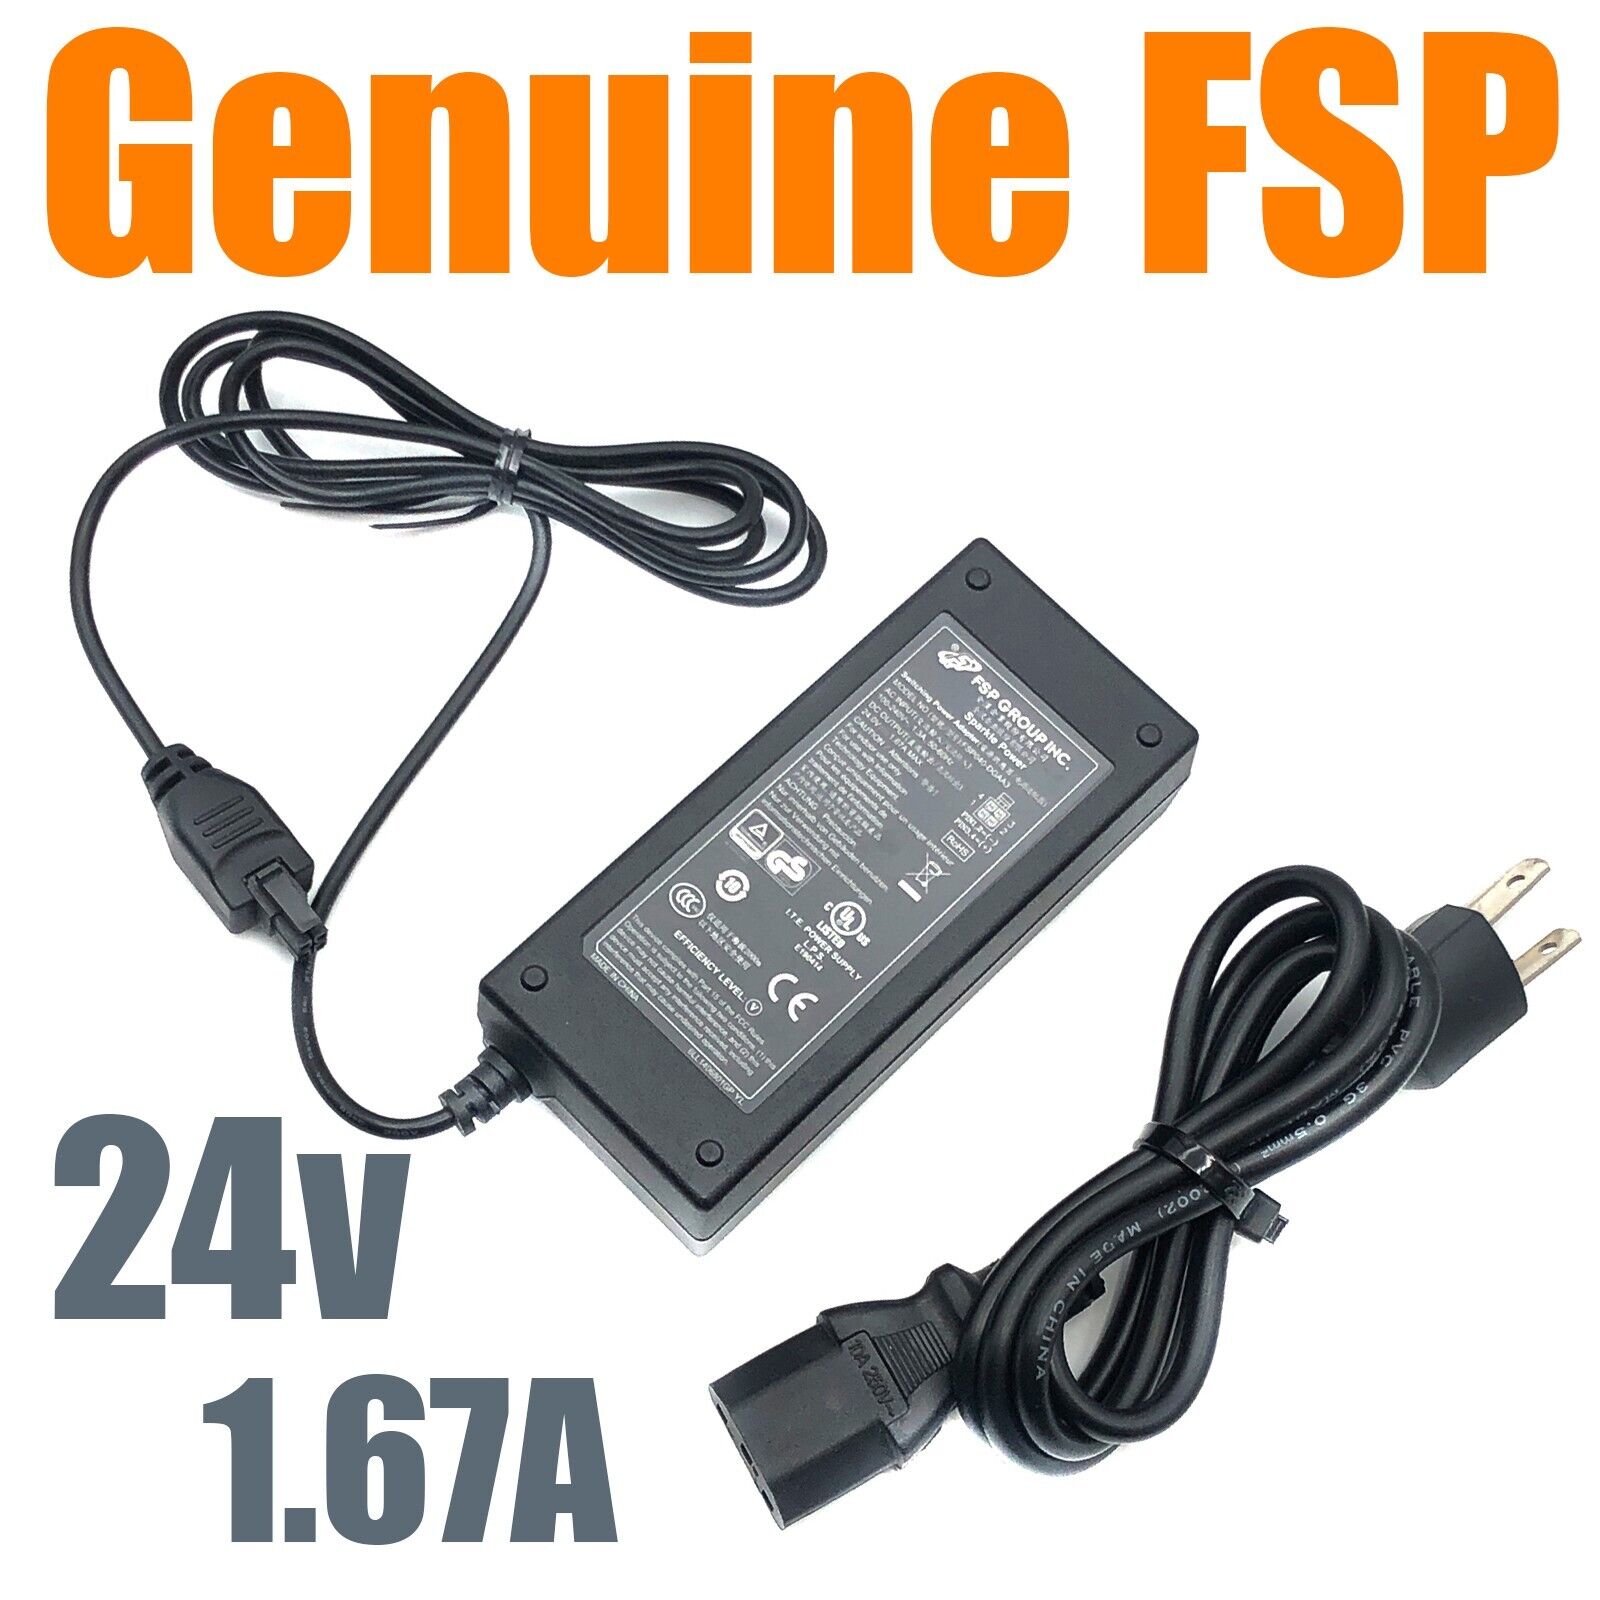 *Brand NEW*Genuine FSP 24V 1.67A Switching Power Adapter FSP040-DGAA3 4-Pin Plug Power Supply